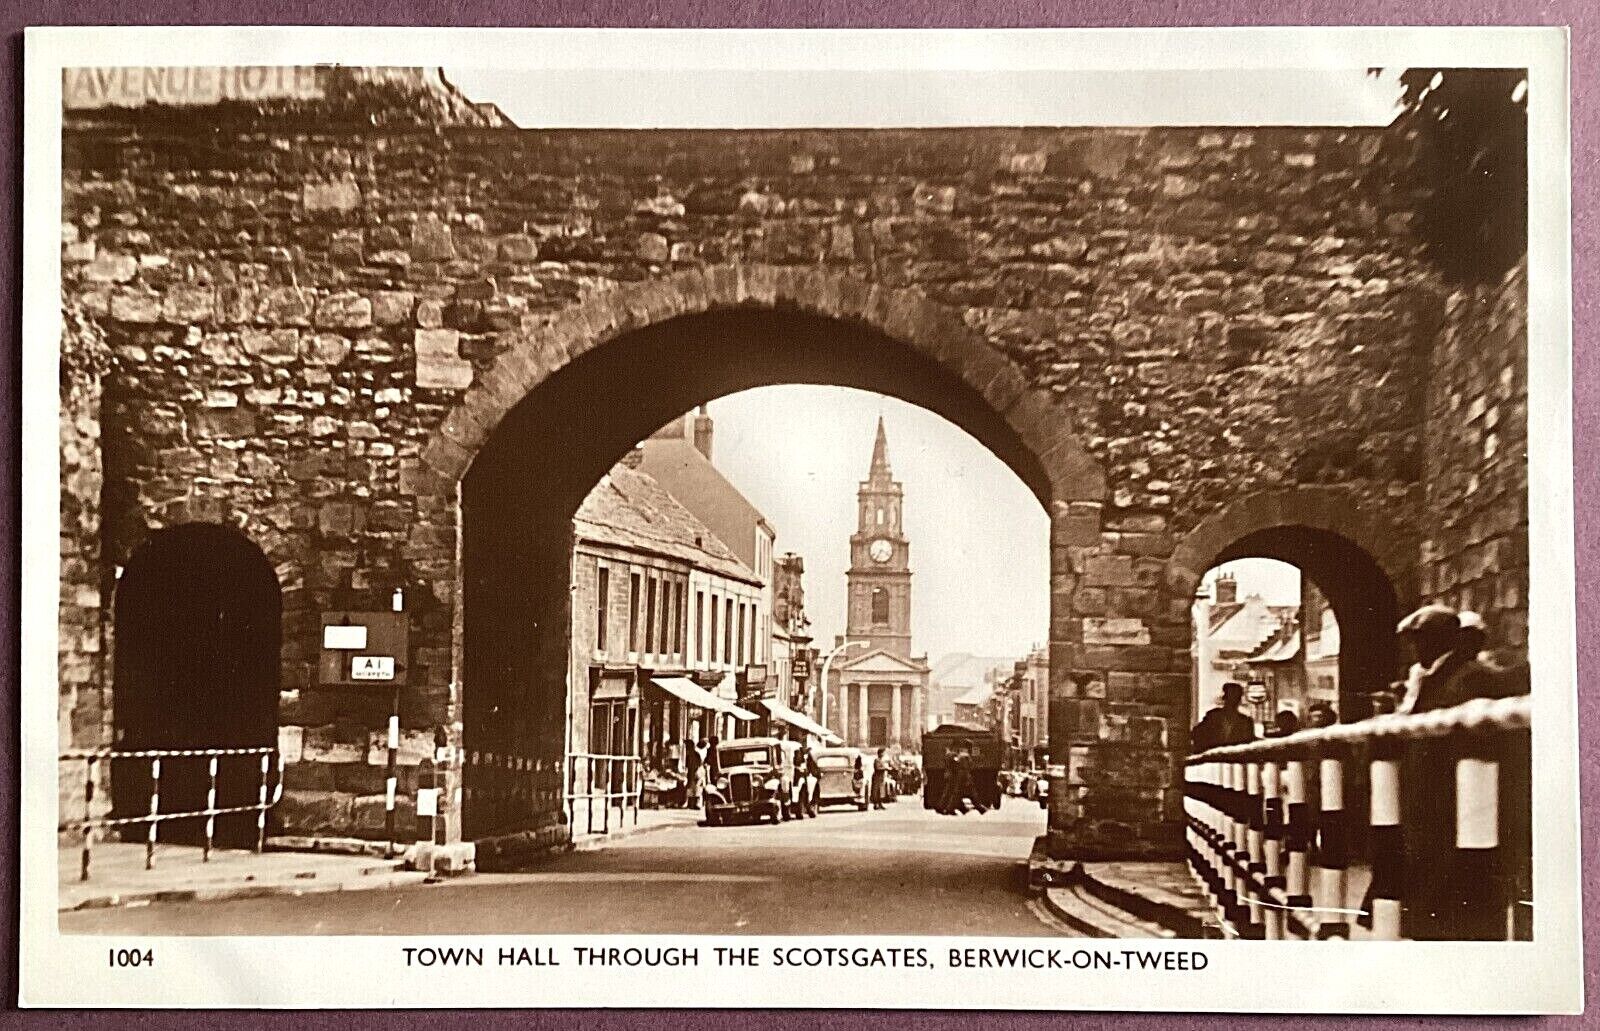 House Clearance - REAL PHOTO POSTCARD - TOWN HALL THROUGH THE SCOTSGATES, BERWICK-ON-TWEED